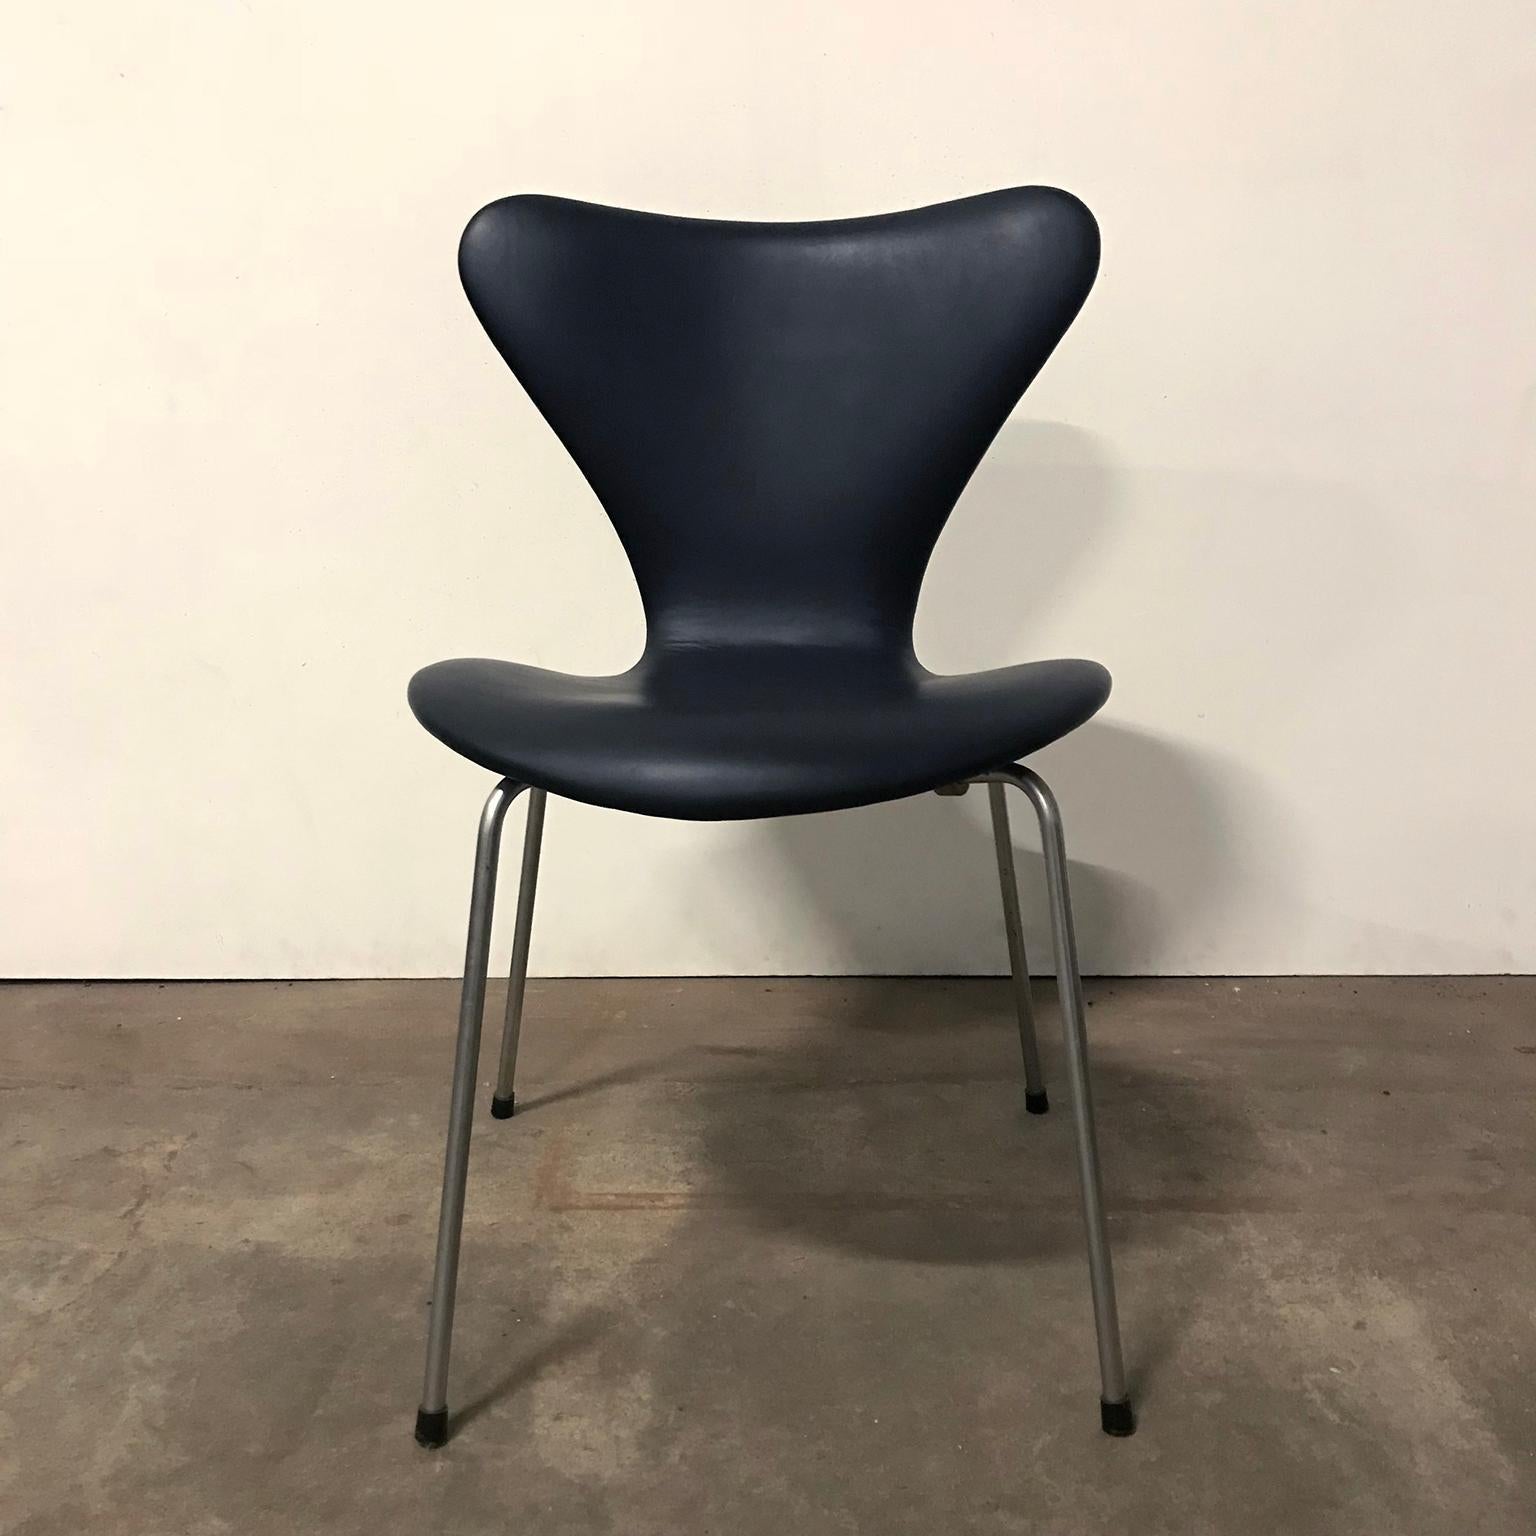 Mid-20th Century 1955, Arne Jacobsen, Early Vintage Black Faux Leather 3107 Butterfly Chair For Sale